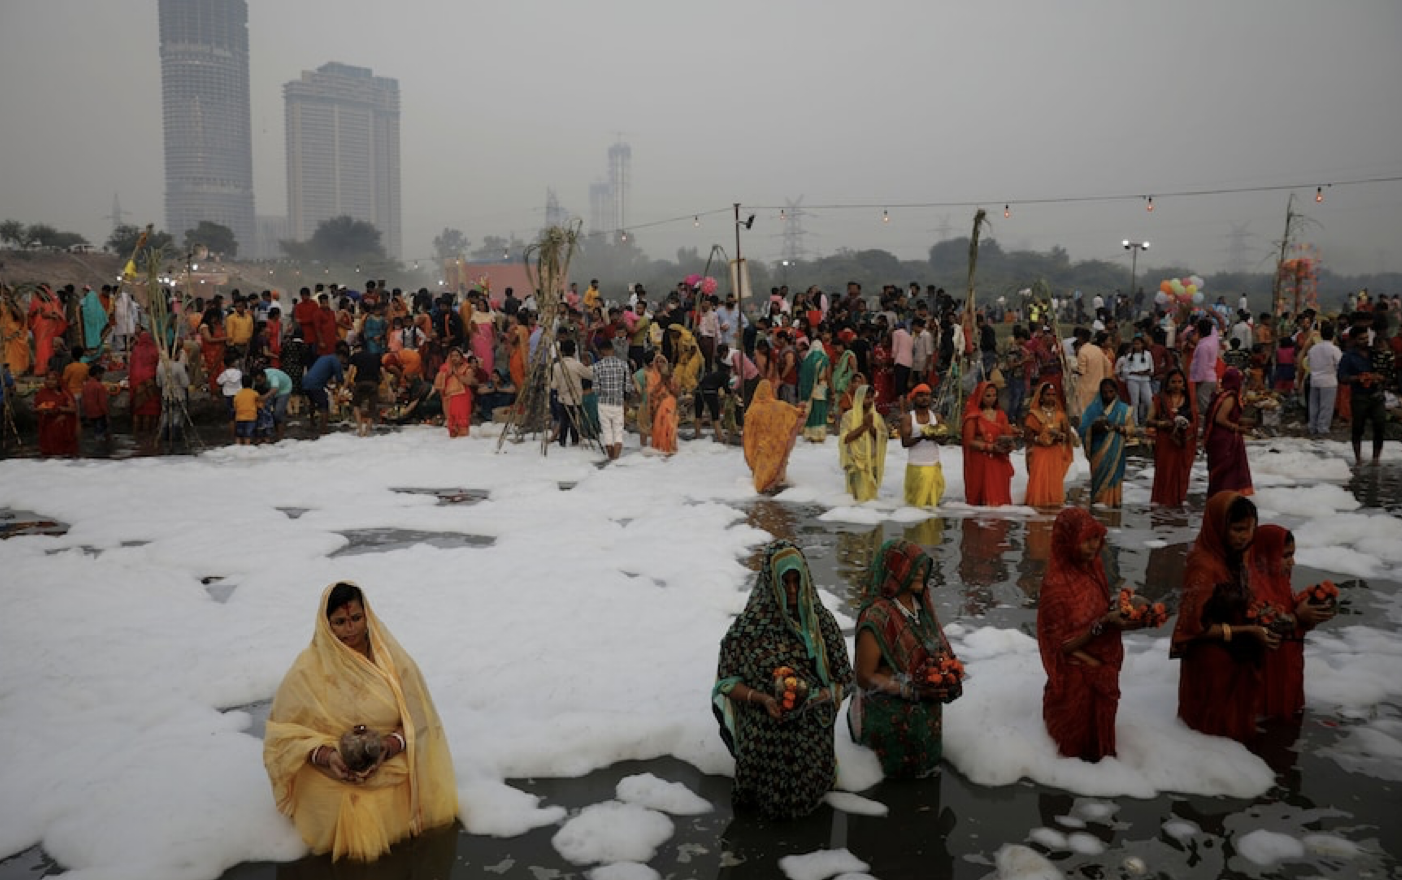 River in India sacred to Hindus blanketed in toxic white foamHindus in northern India celebrated the grand Chhath Puja festival on Nov. 11 by ta...